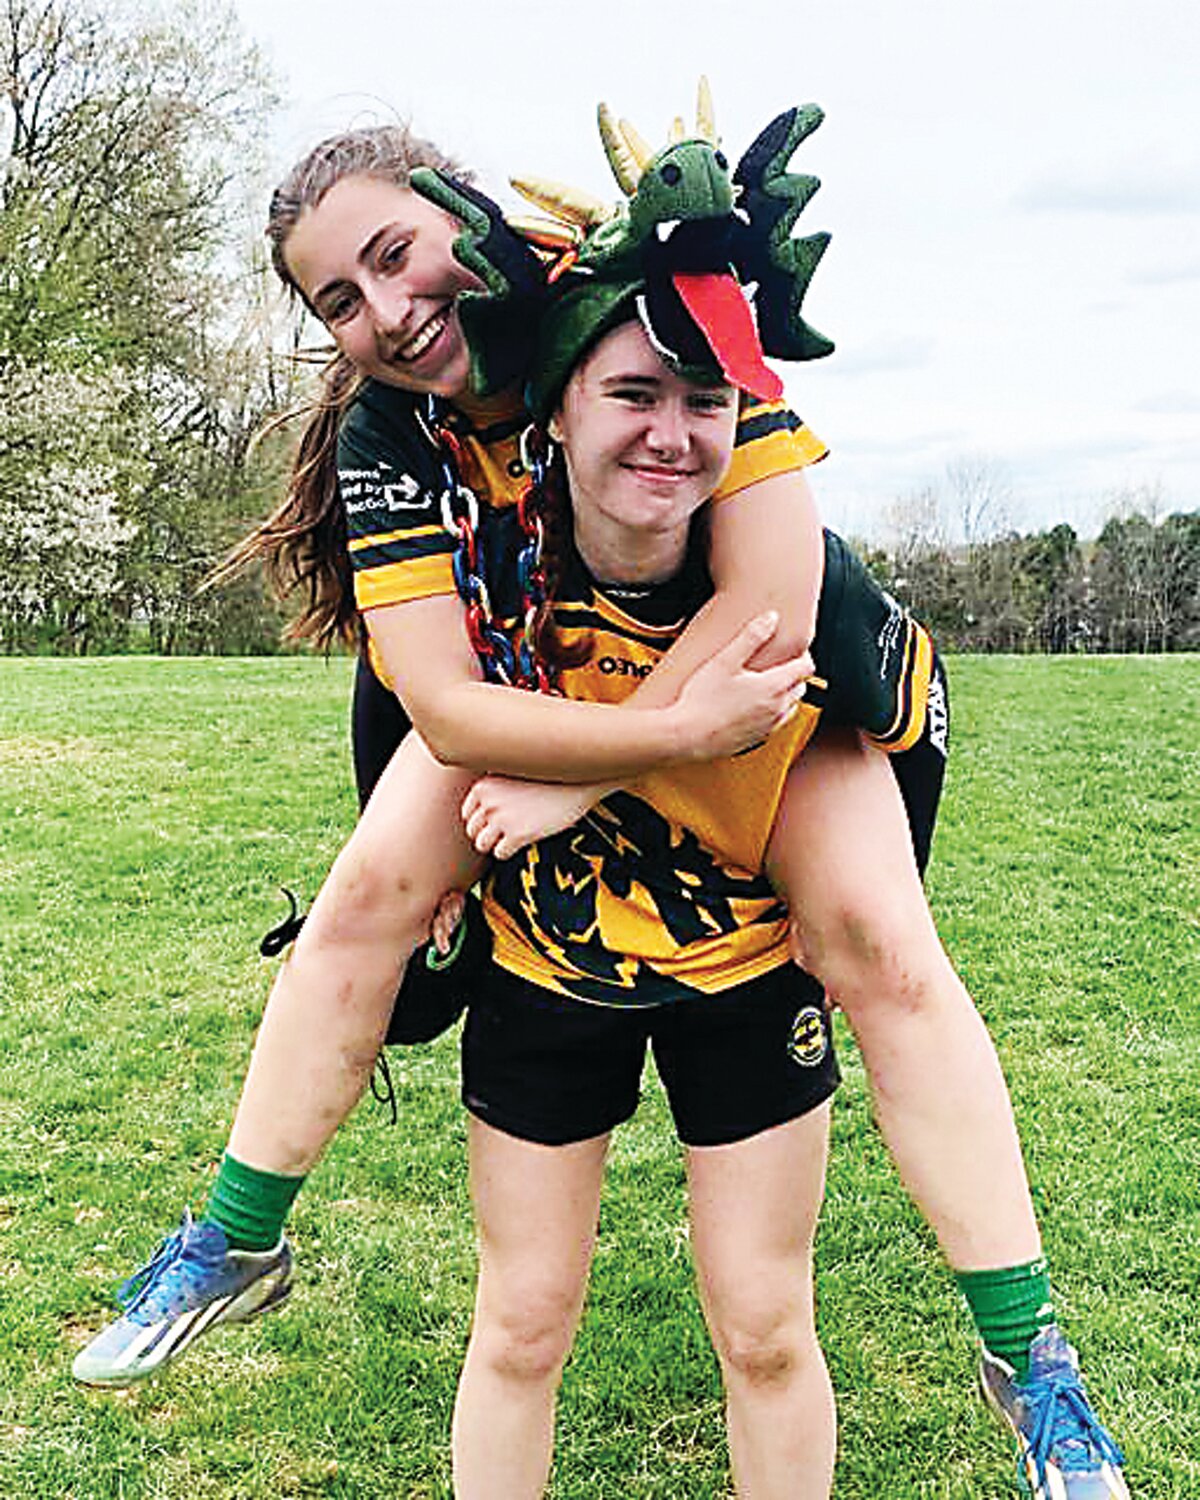 Doylestown Rugby high school girls player Nora Rosenburg, Player of the Match, in front, and Daisie Jurbala, Hit Chain Award winner, in the back.